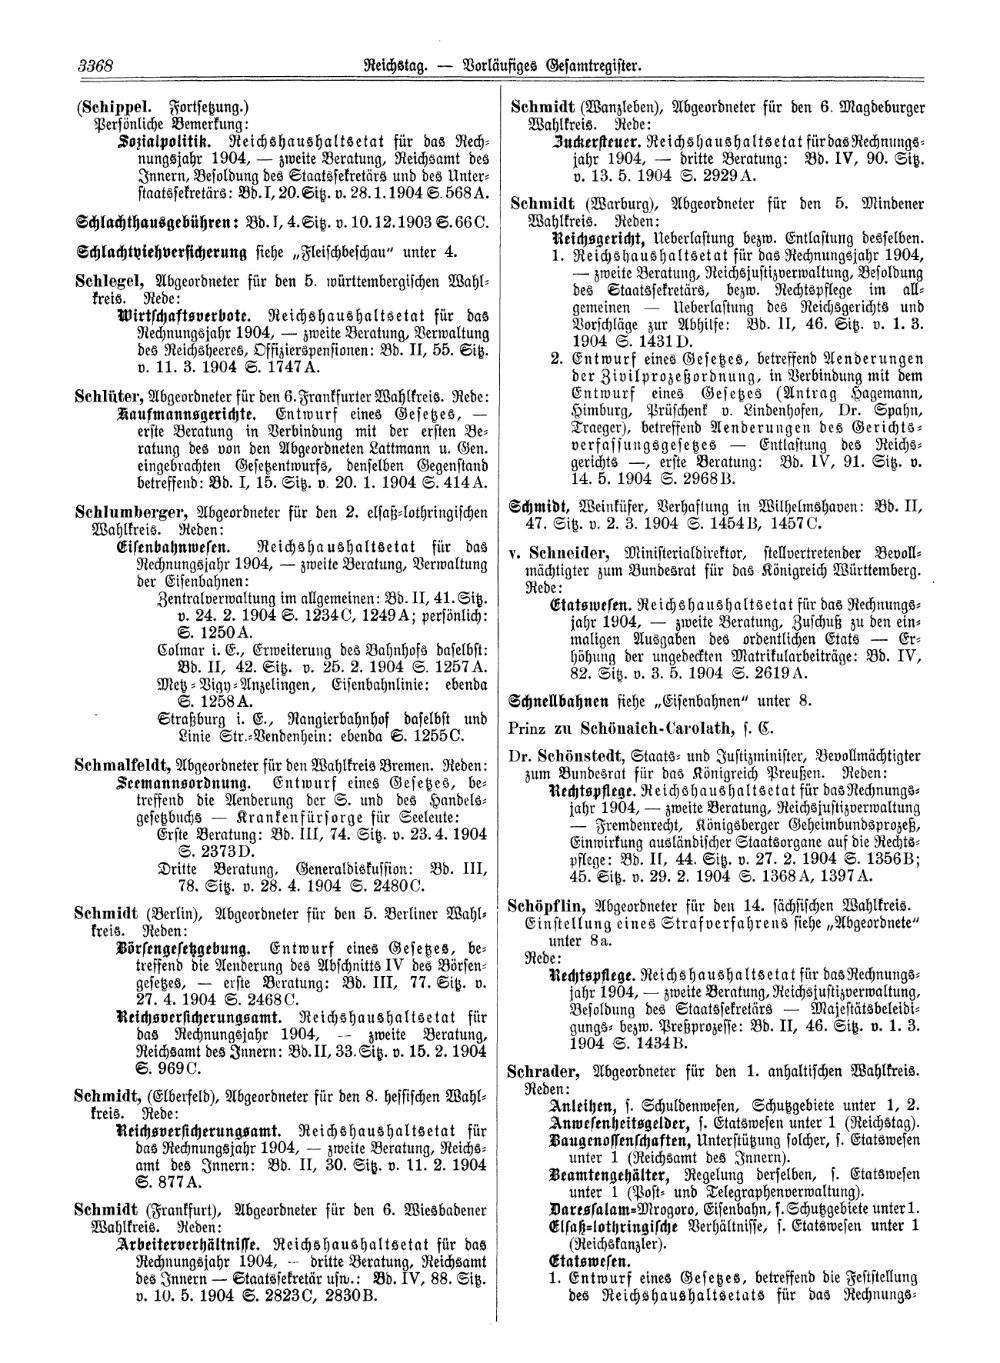 Scan of page 3368